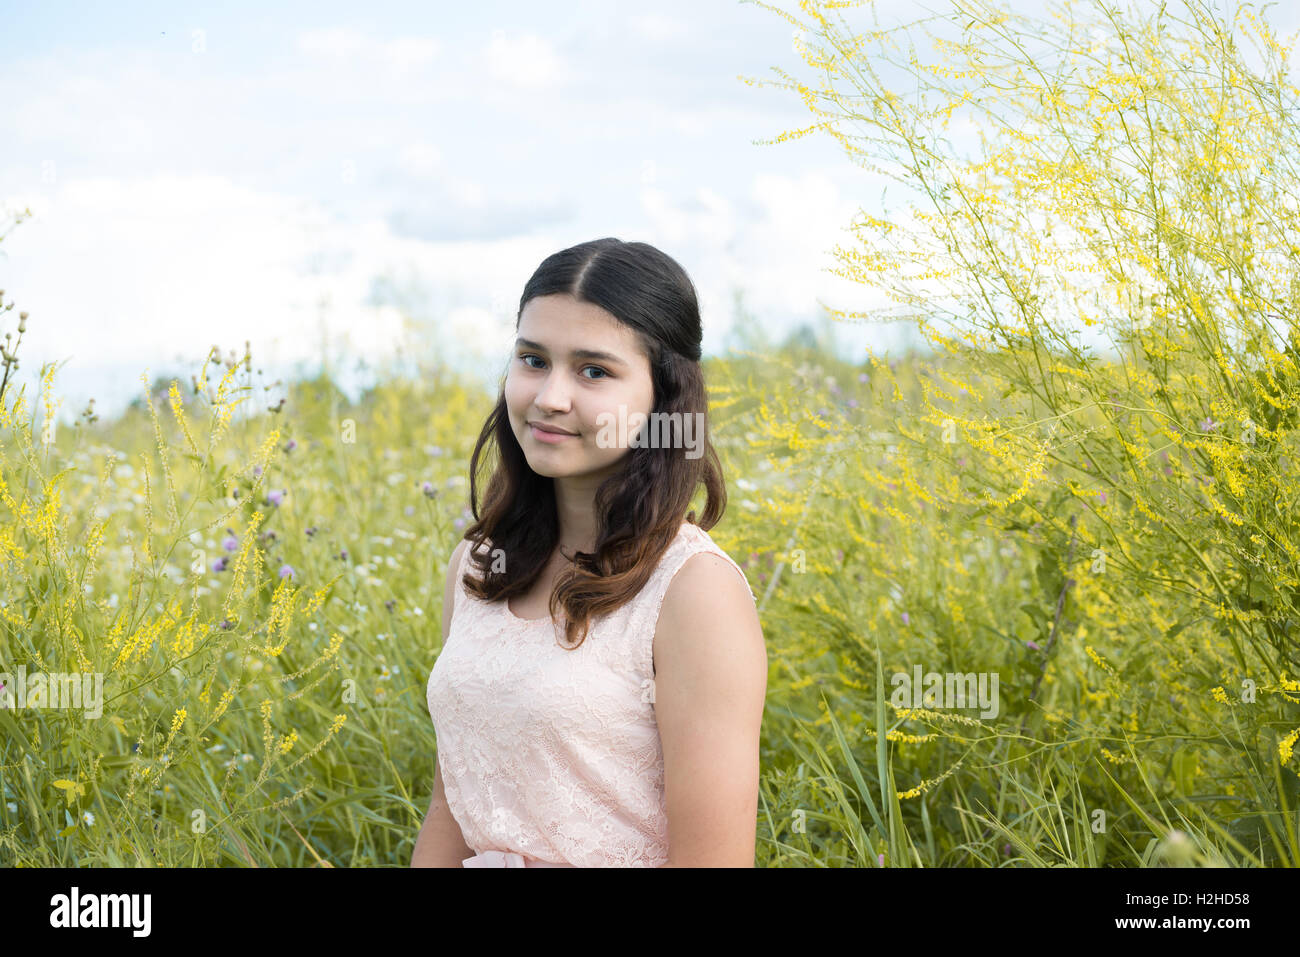 Girl in guipure dress resting on meadow Stock Photo